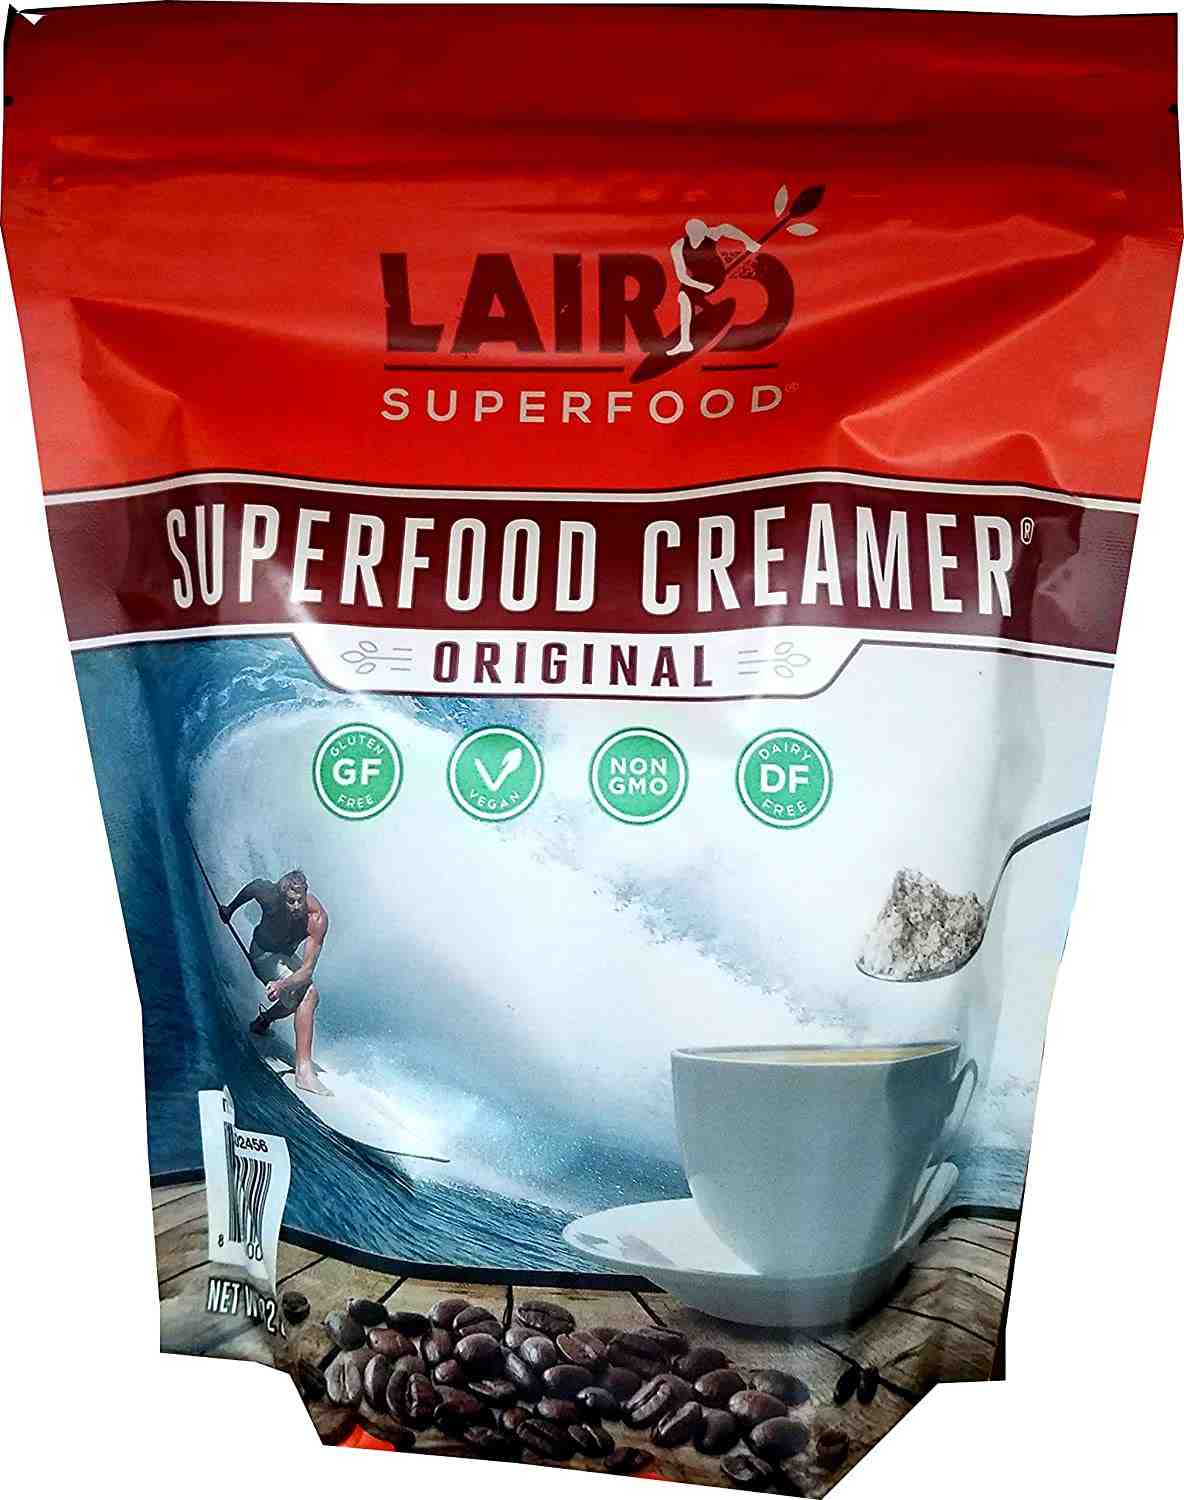 Does Laird Hamilton own Laird Superfood?